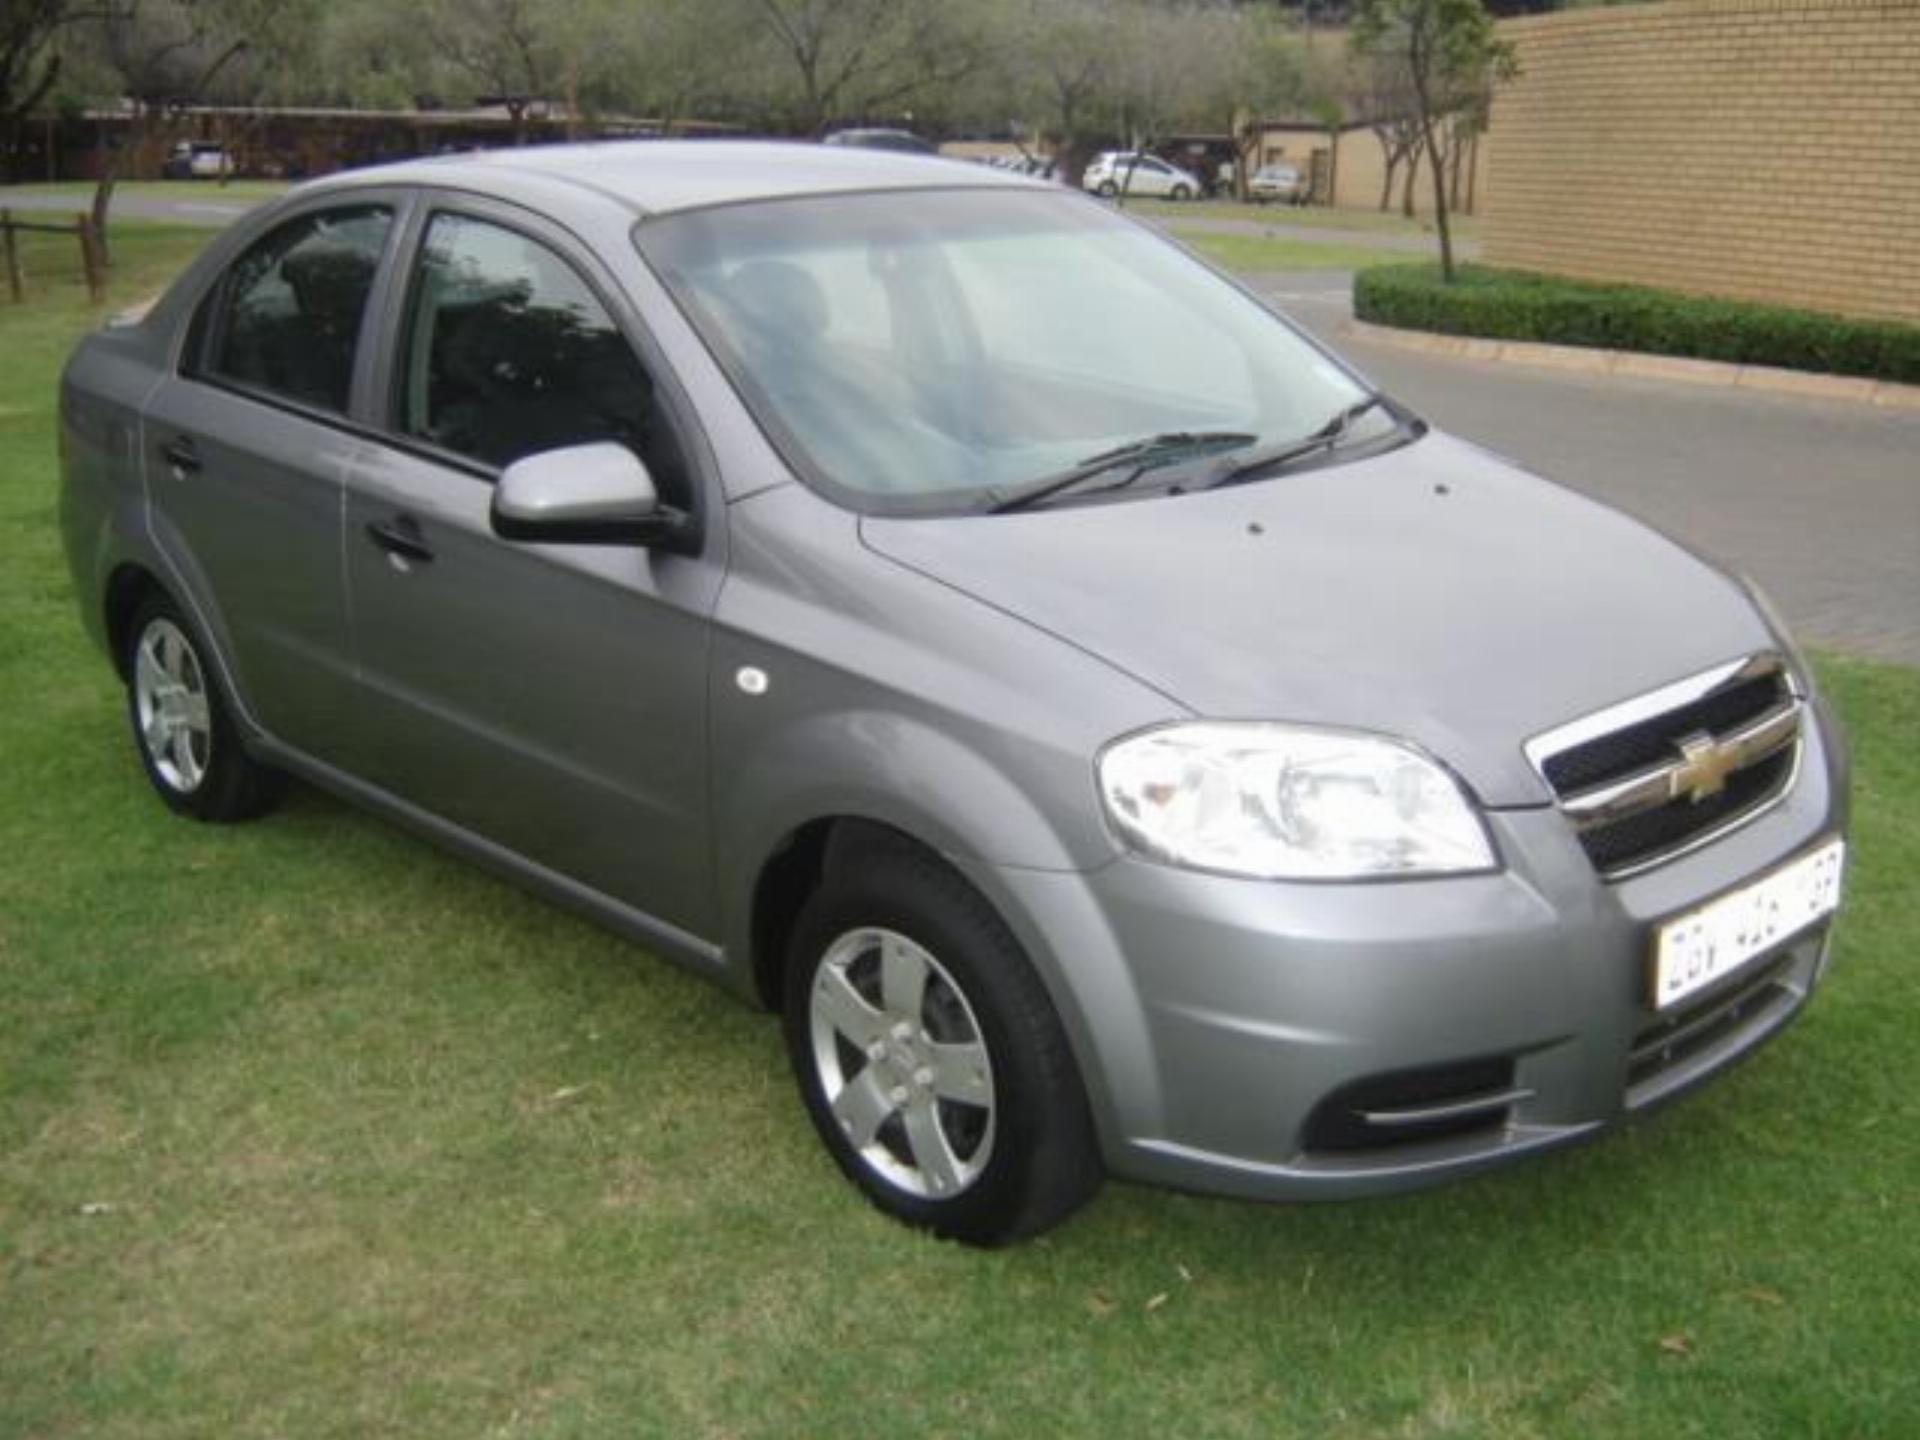 Used Chevrolet Aveo 1.6 LS A/T 2010 on auction PV1003456